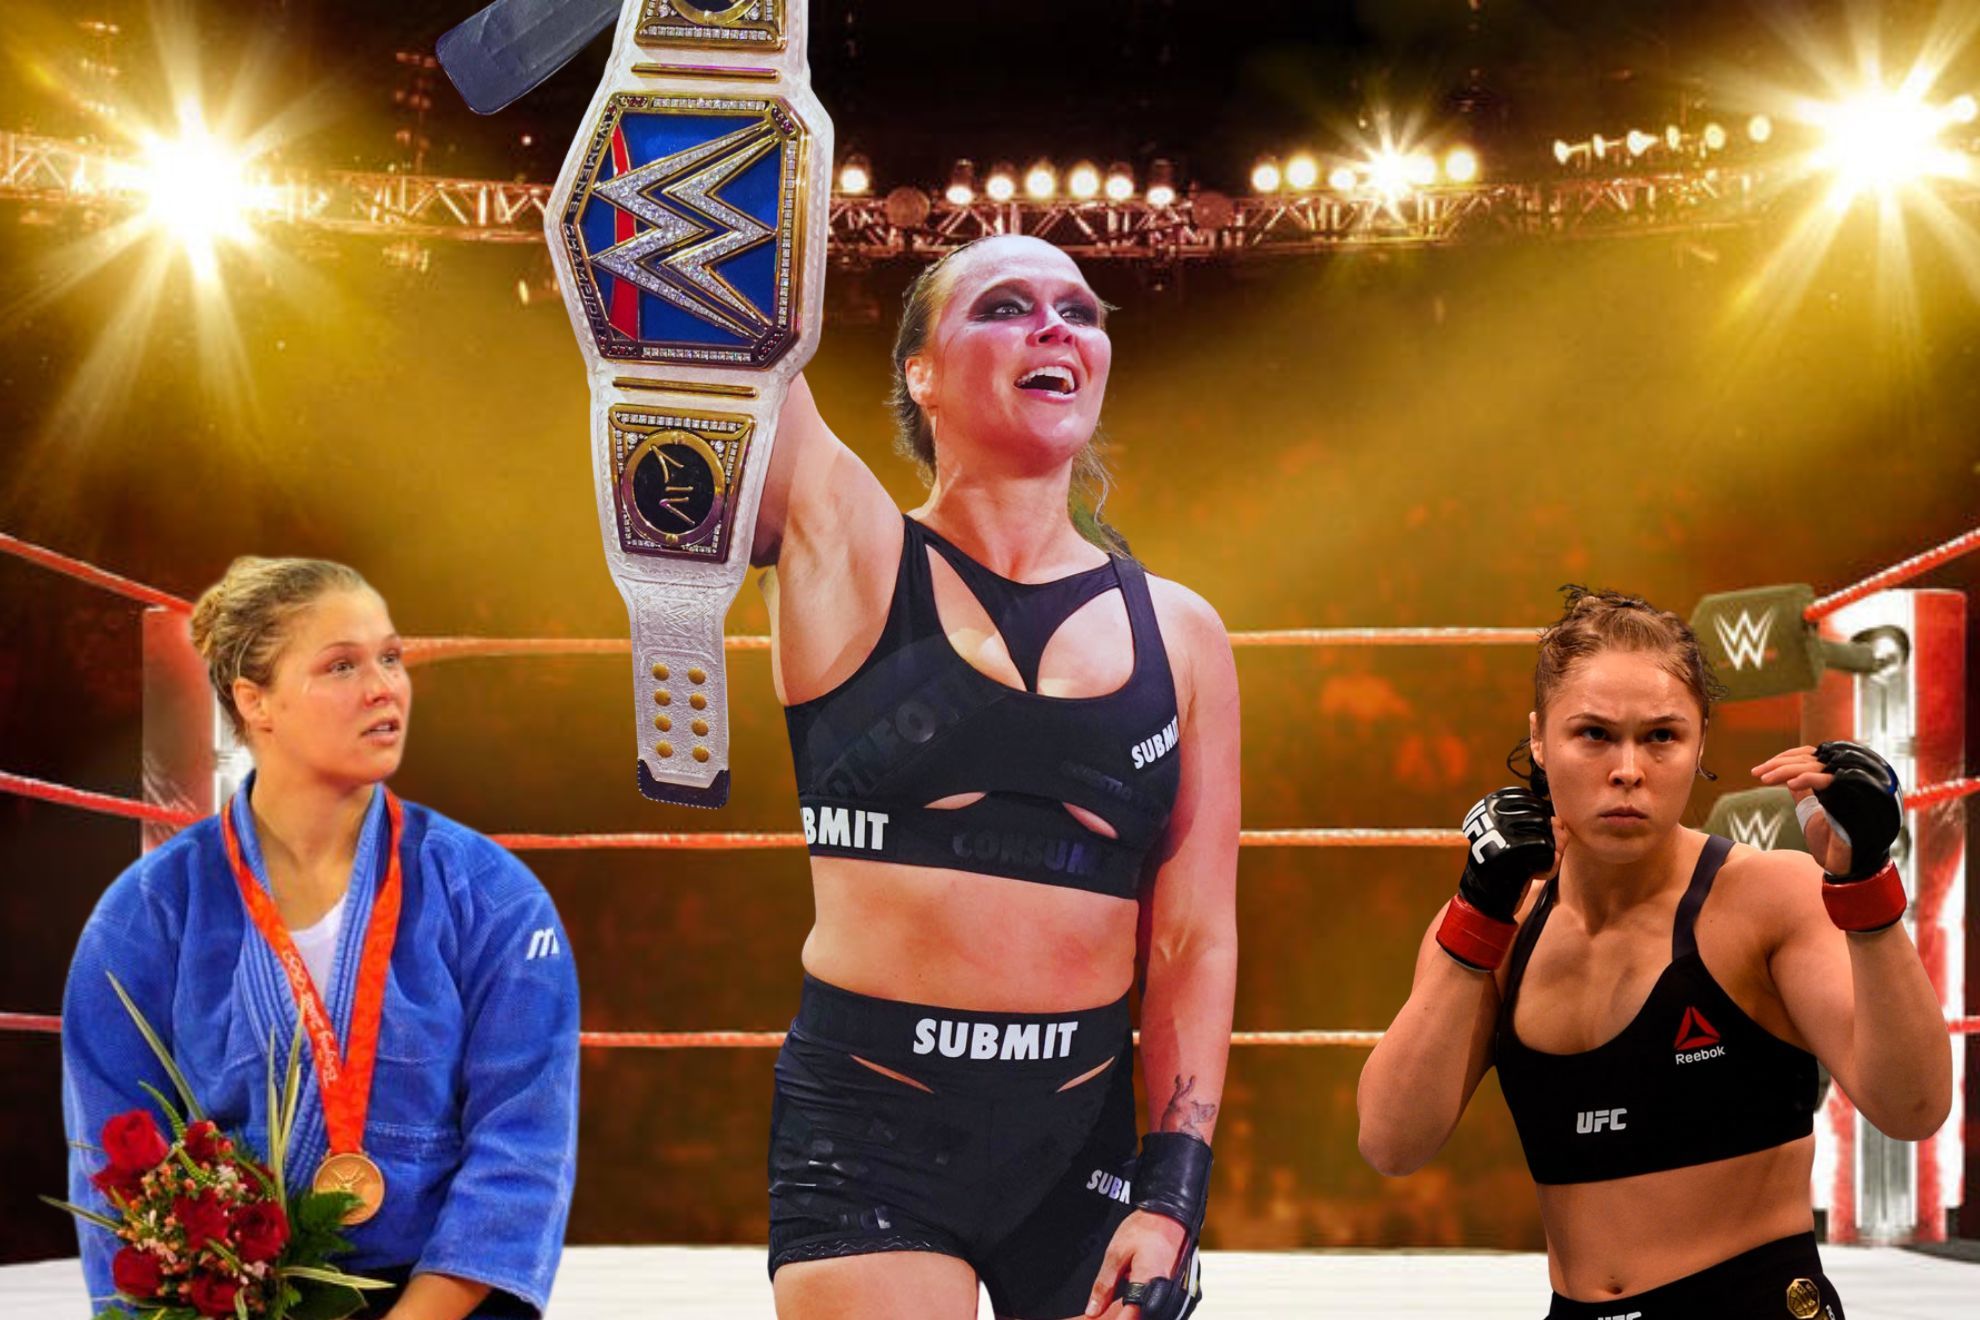 Ronda Rousey's status as a WWE star could be in peril. Are wrestling fans done with her?